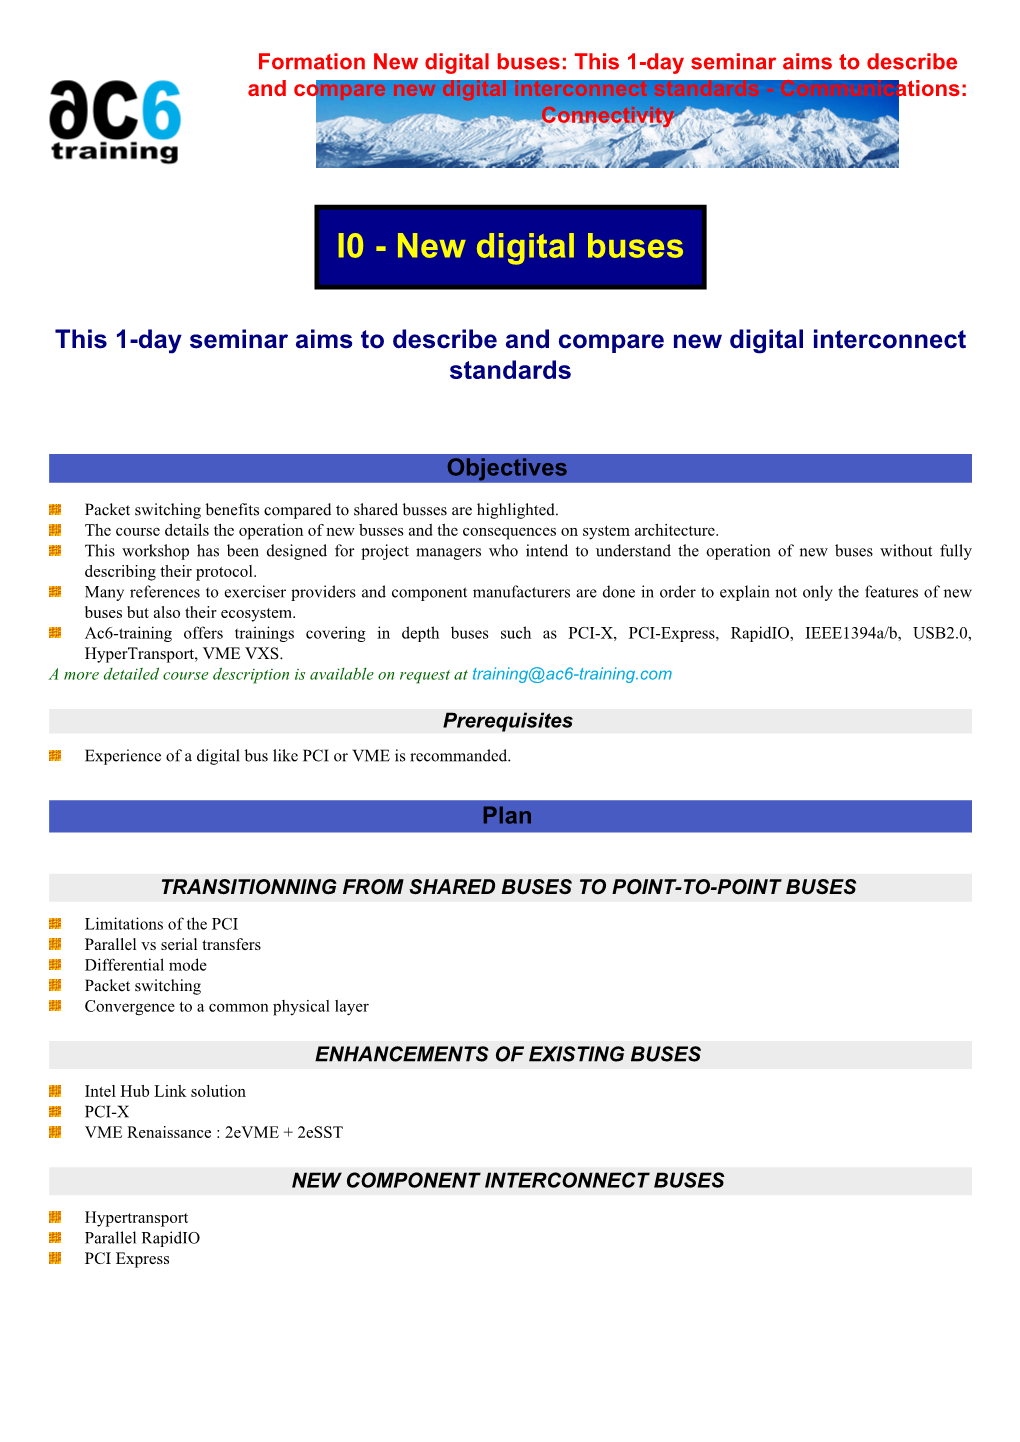 Formation New Digital Buses: This 1-Day Seminar Aims to Describe and Compare New Digital Interconnect Standards - Communications: Connectivity